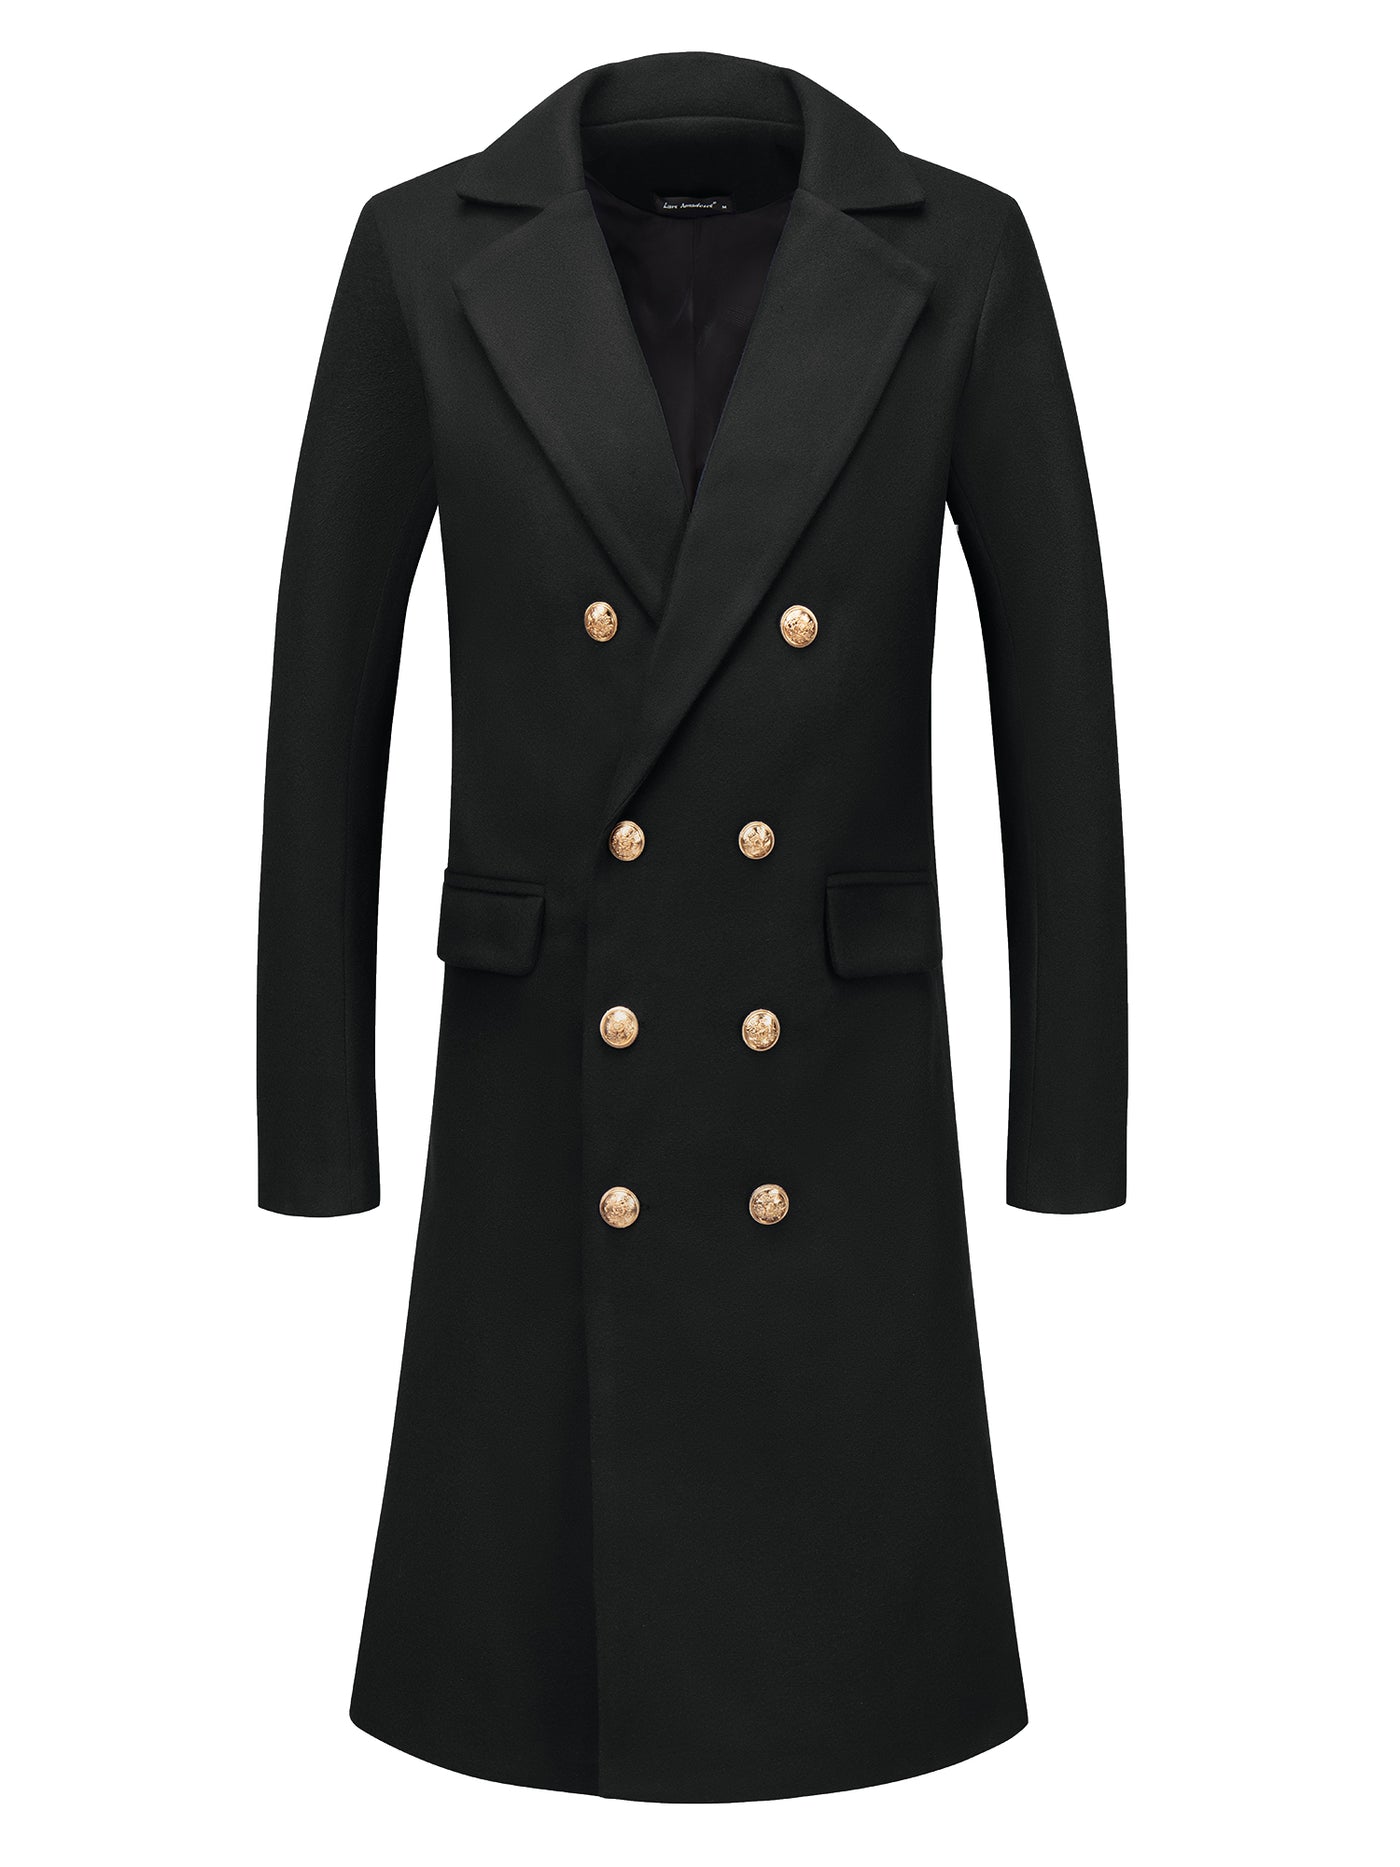 Bublédon Trench Coat for Men's Notch Lapel Double Breasted Slim Fit Winter Overcoats